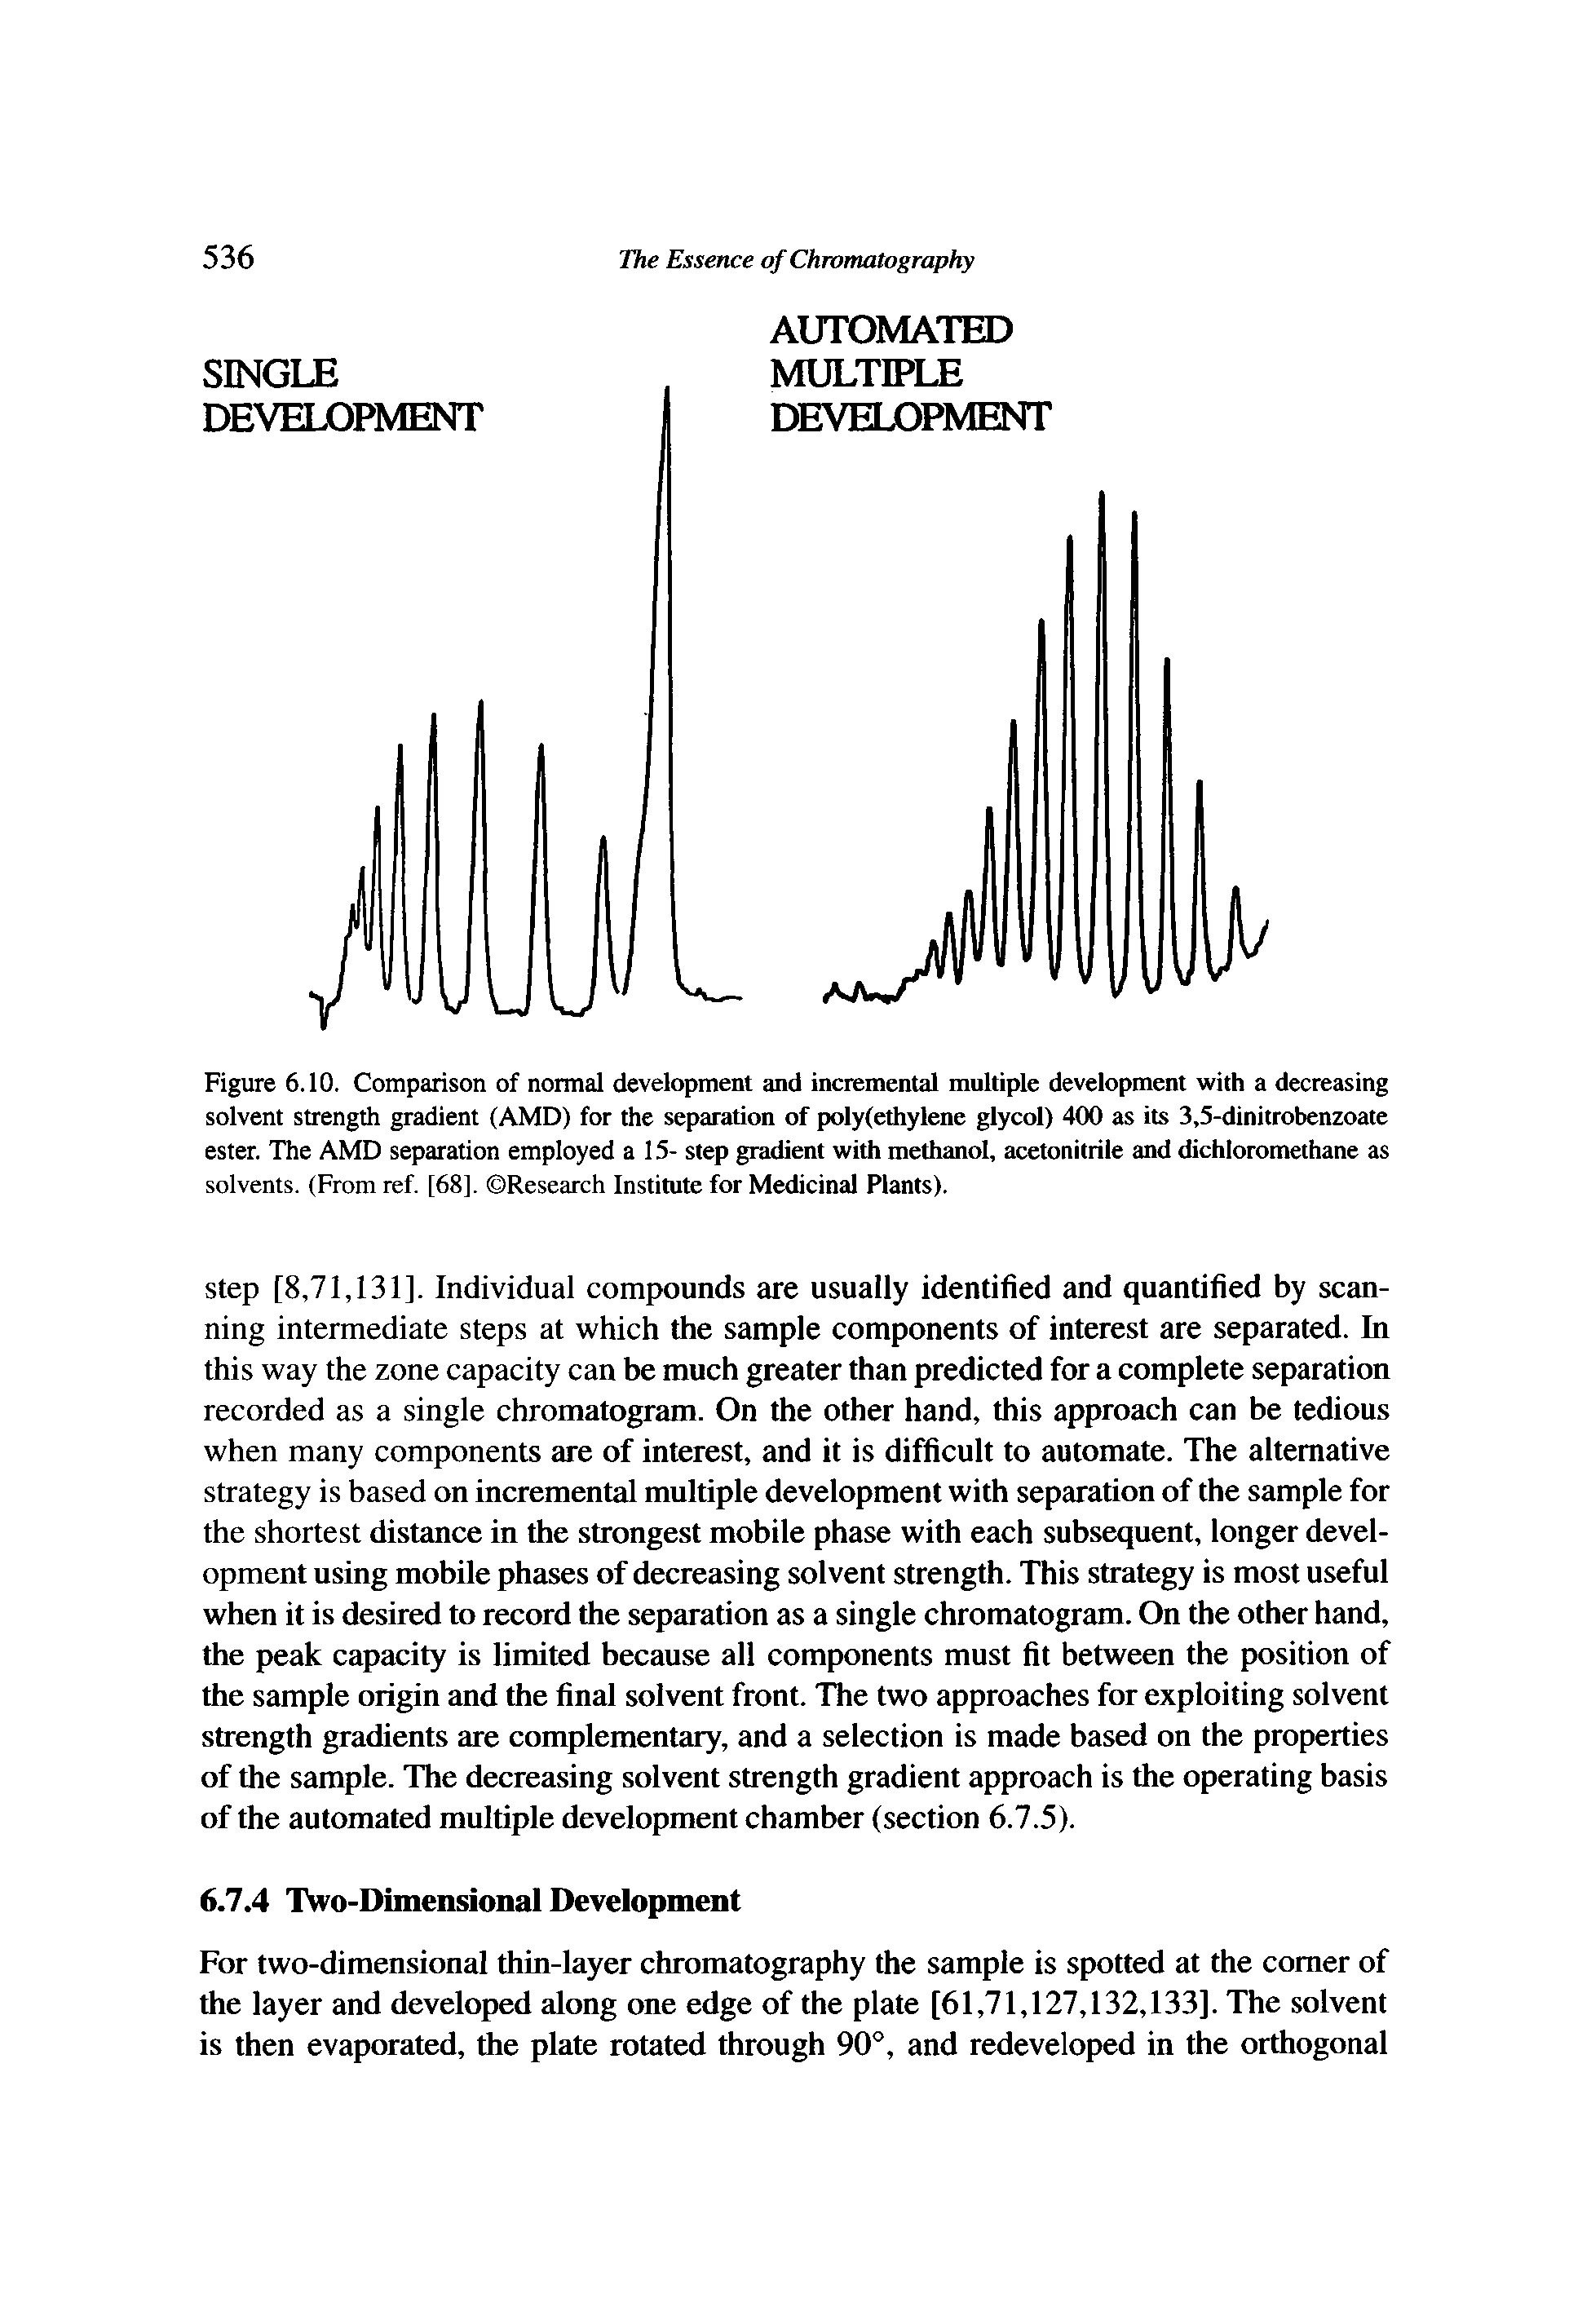 Figure 6.10. Comparison of normal development and incremental multiple development with a decreasing solvent strength gradient (AMD) for the separation of poly(ethylene glycol) 400 as its 3,5-dinitrobenzoate ester. The AMD separation employed a 15- step gradient with methanol, acetonitrile and dichloromethane as...